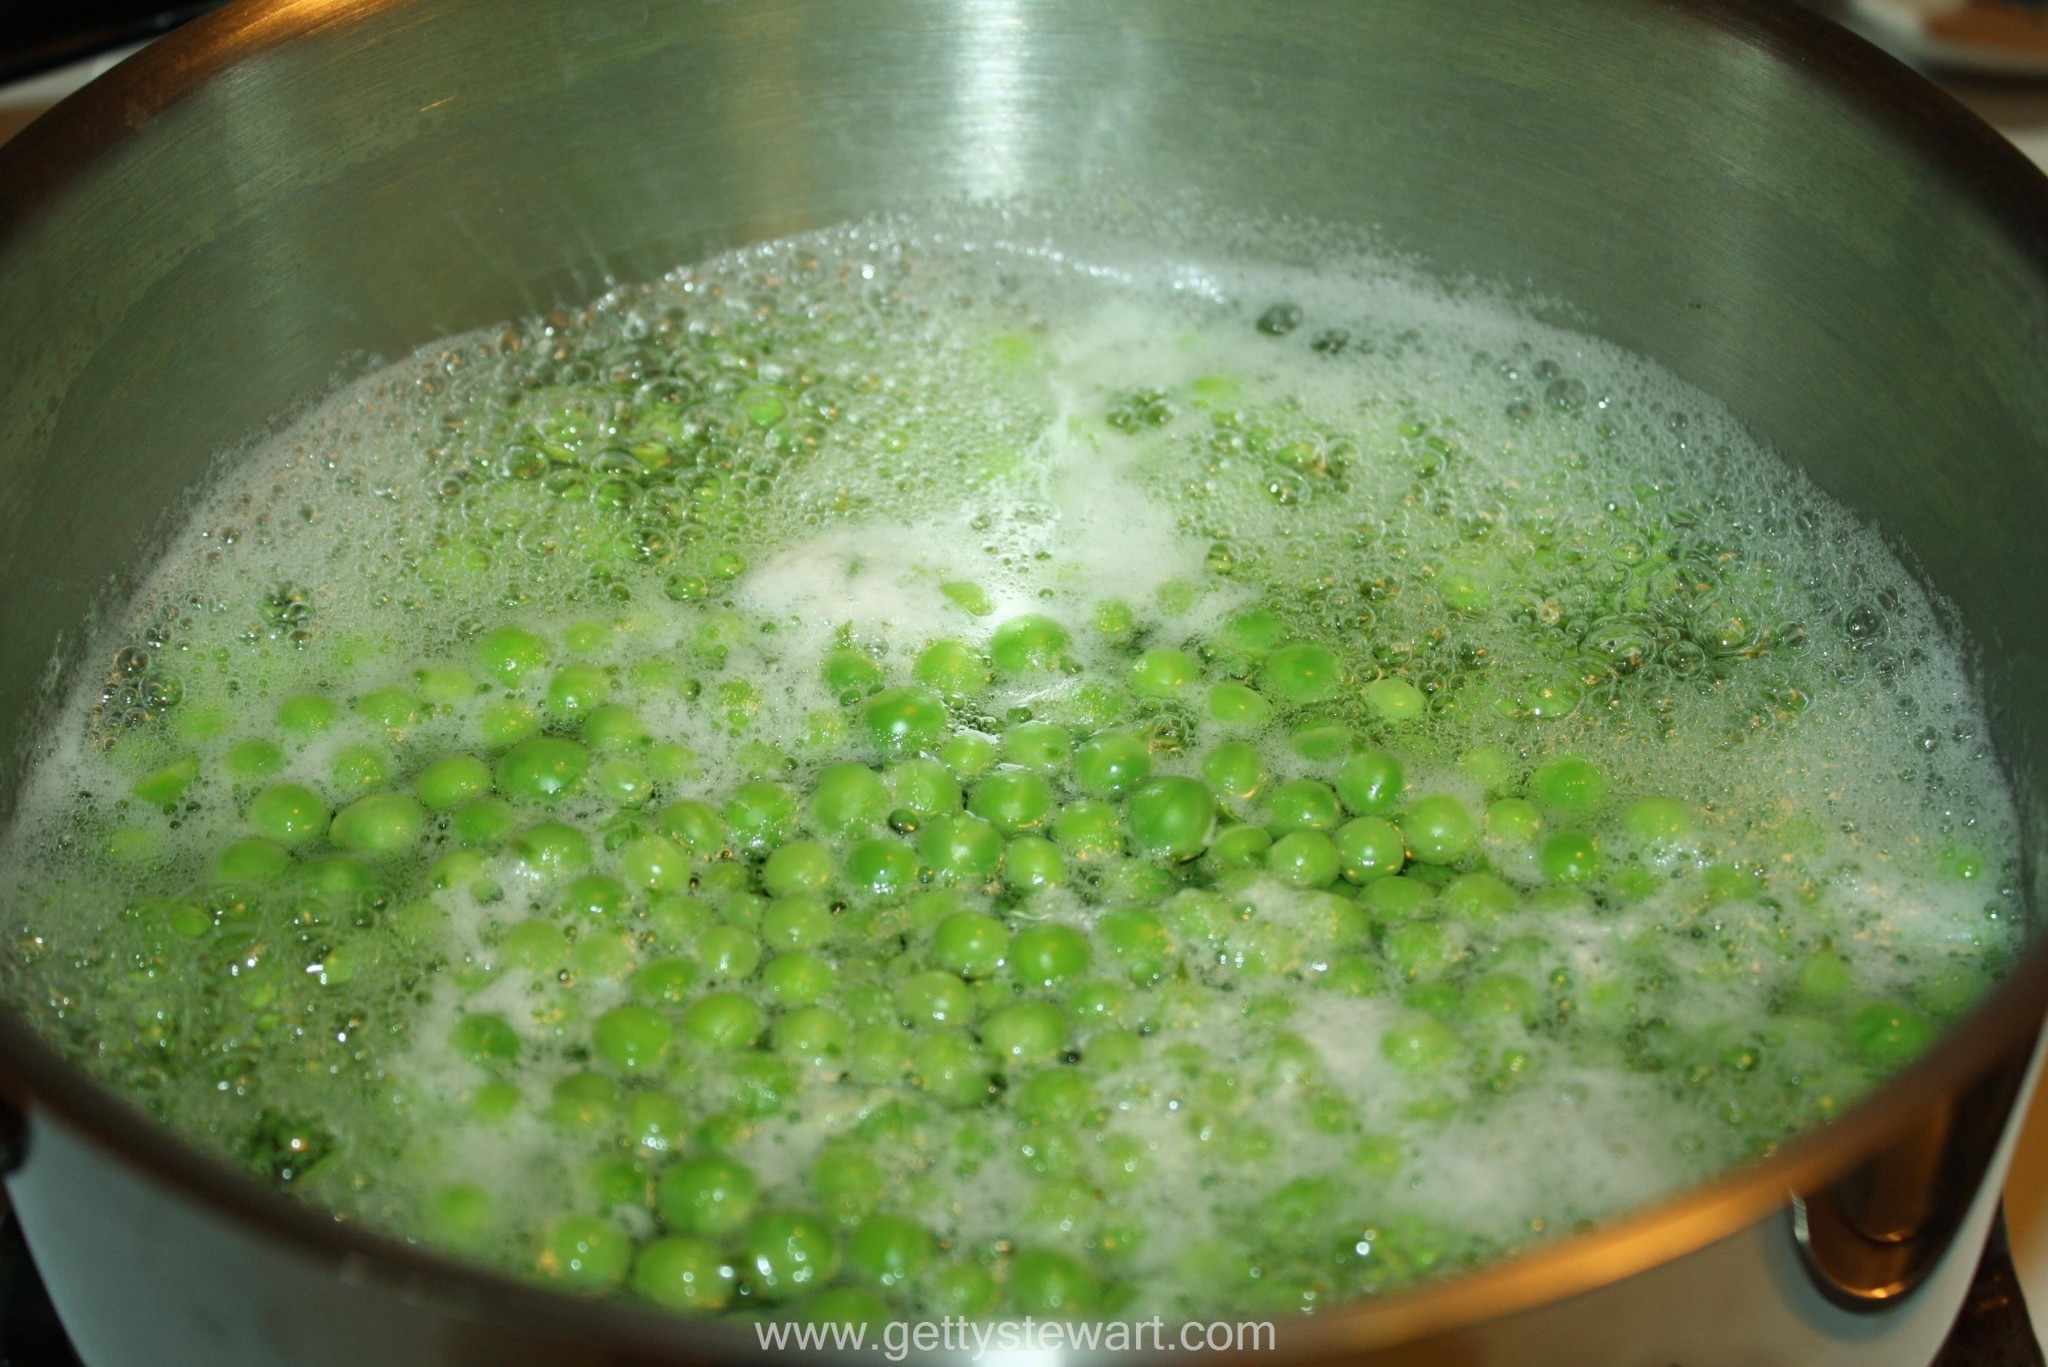 boiling-water-to-blanch-peas-watermarked.jpg